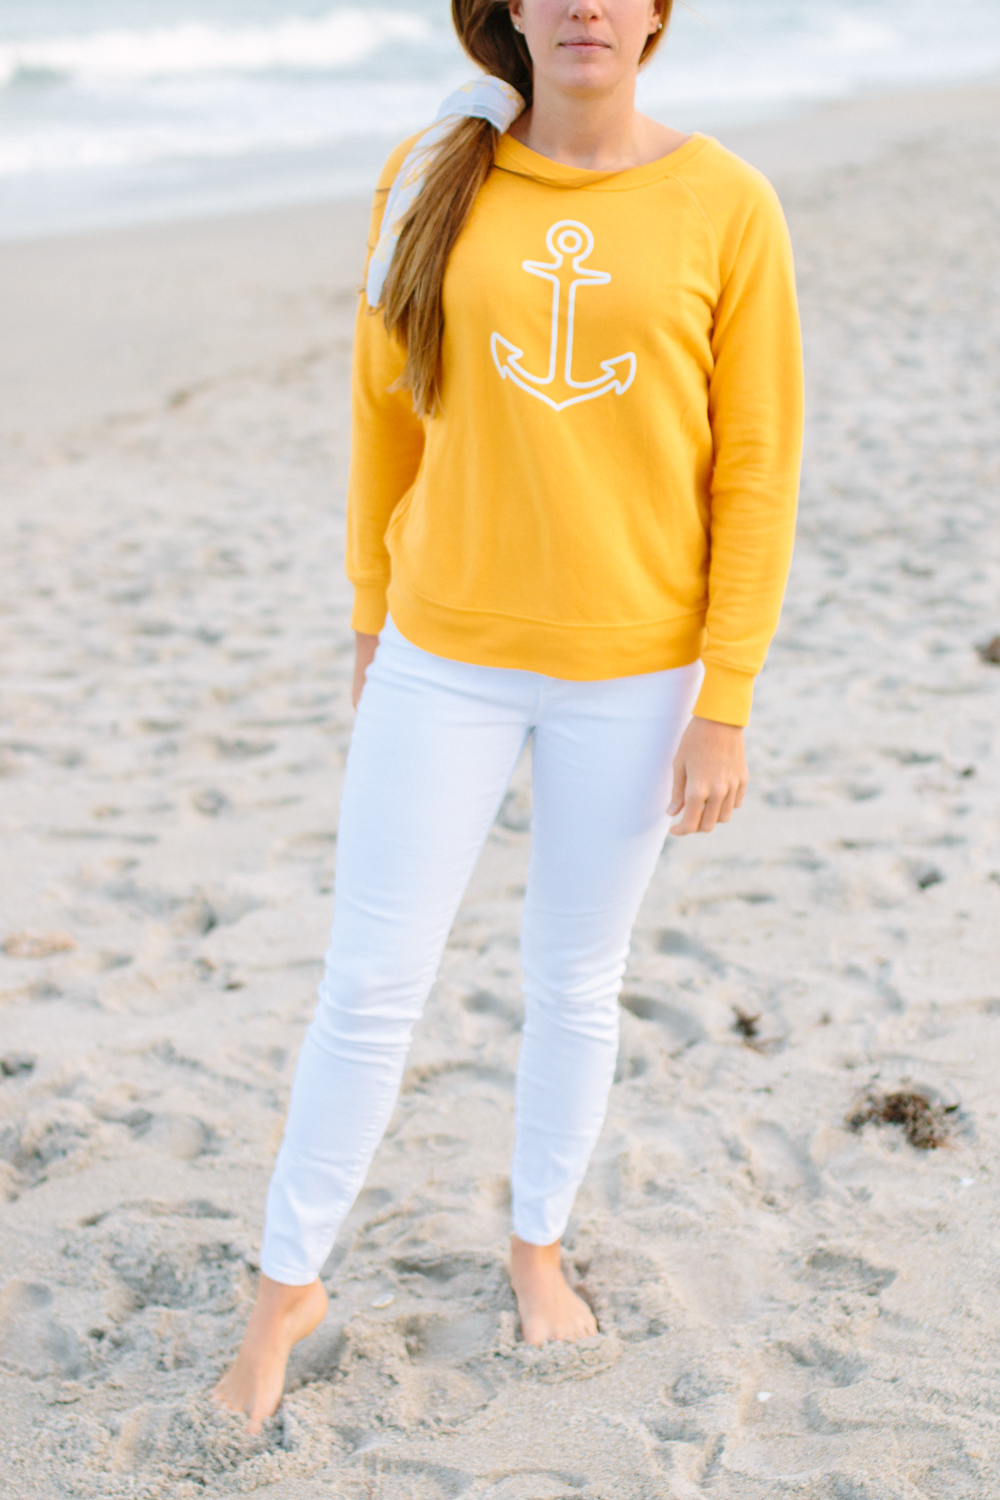 Colorful Graphic Sweatshirt to Wear at the Beach | Old Navy Anchor Graphic Sweatshirt | Casual and Comfy Winter Outfit | AE White Skinny Jeans - More on www.thesunshinestyle.com